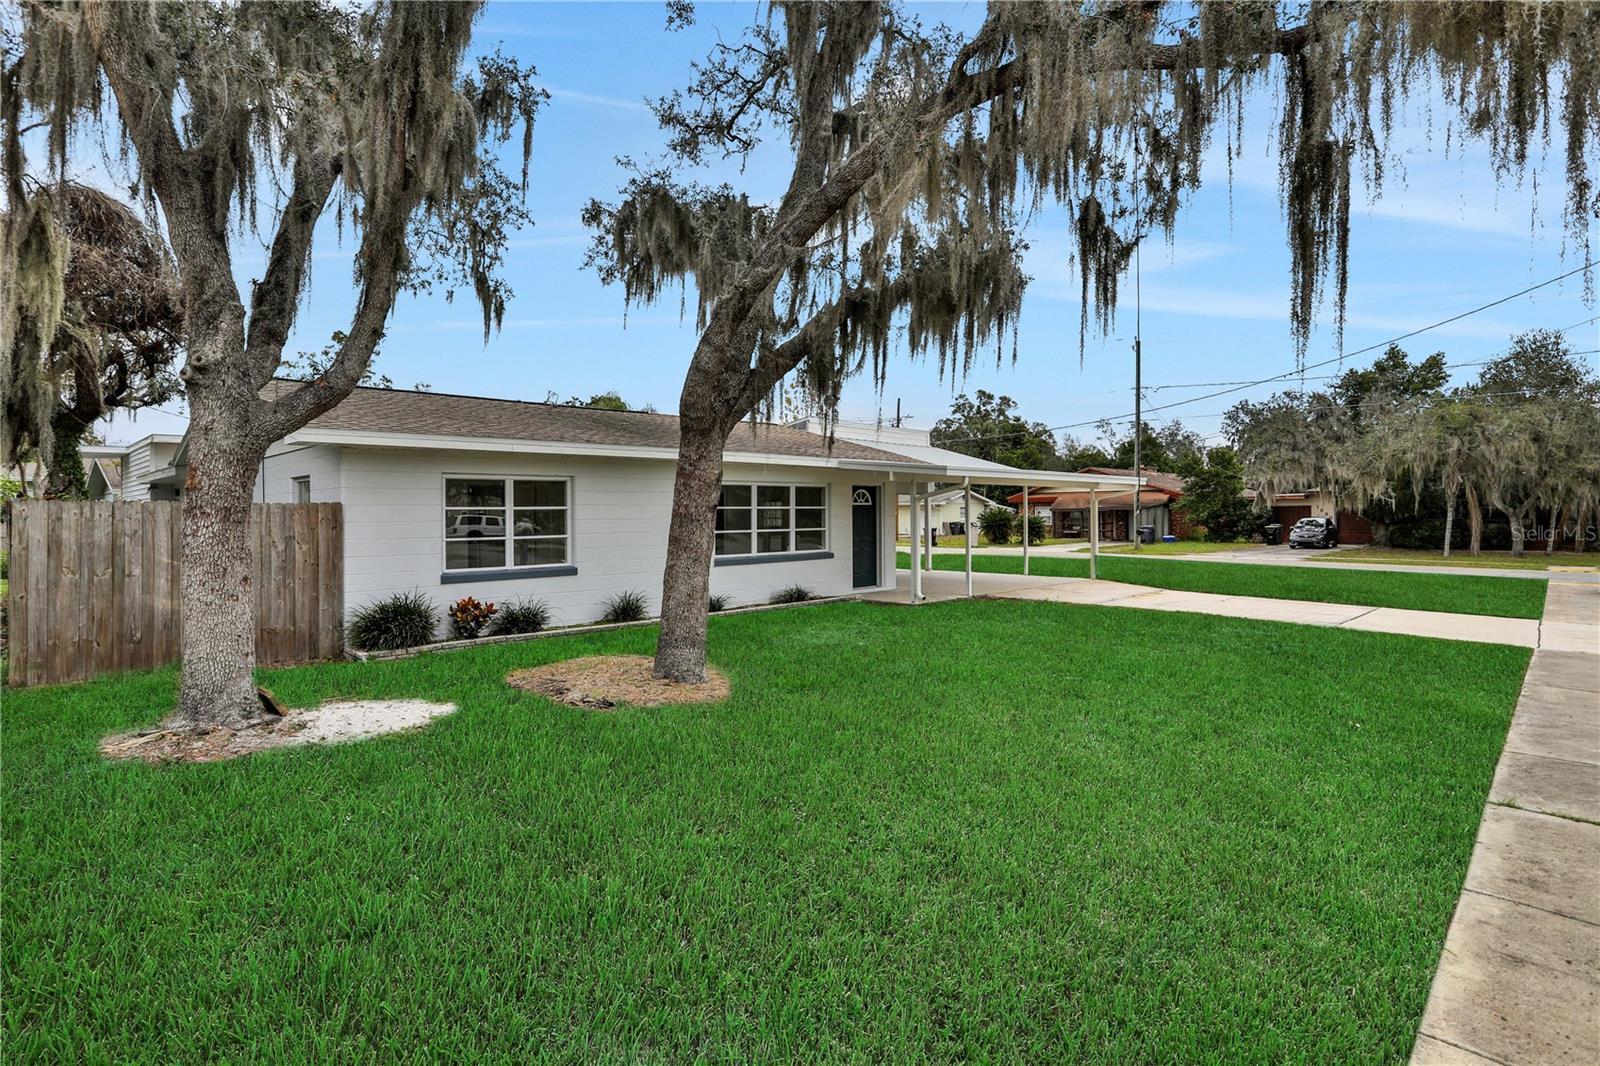 Photo one of 2601 Avenue S Nw Winter Haven FL 33881 | MLS P4928856